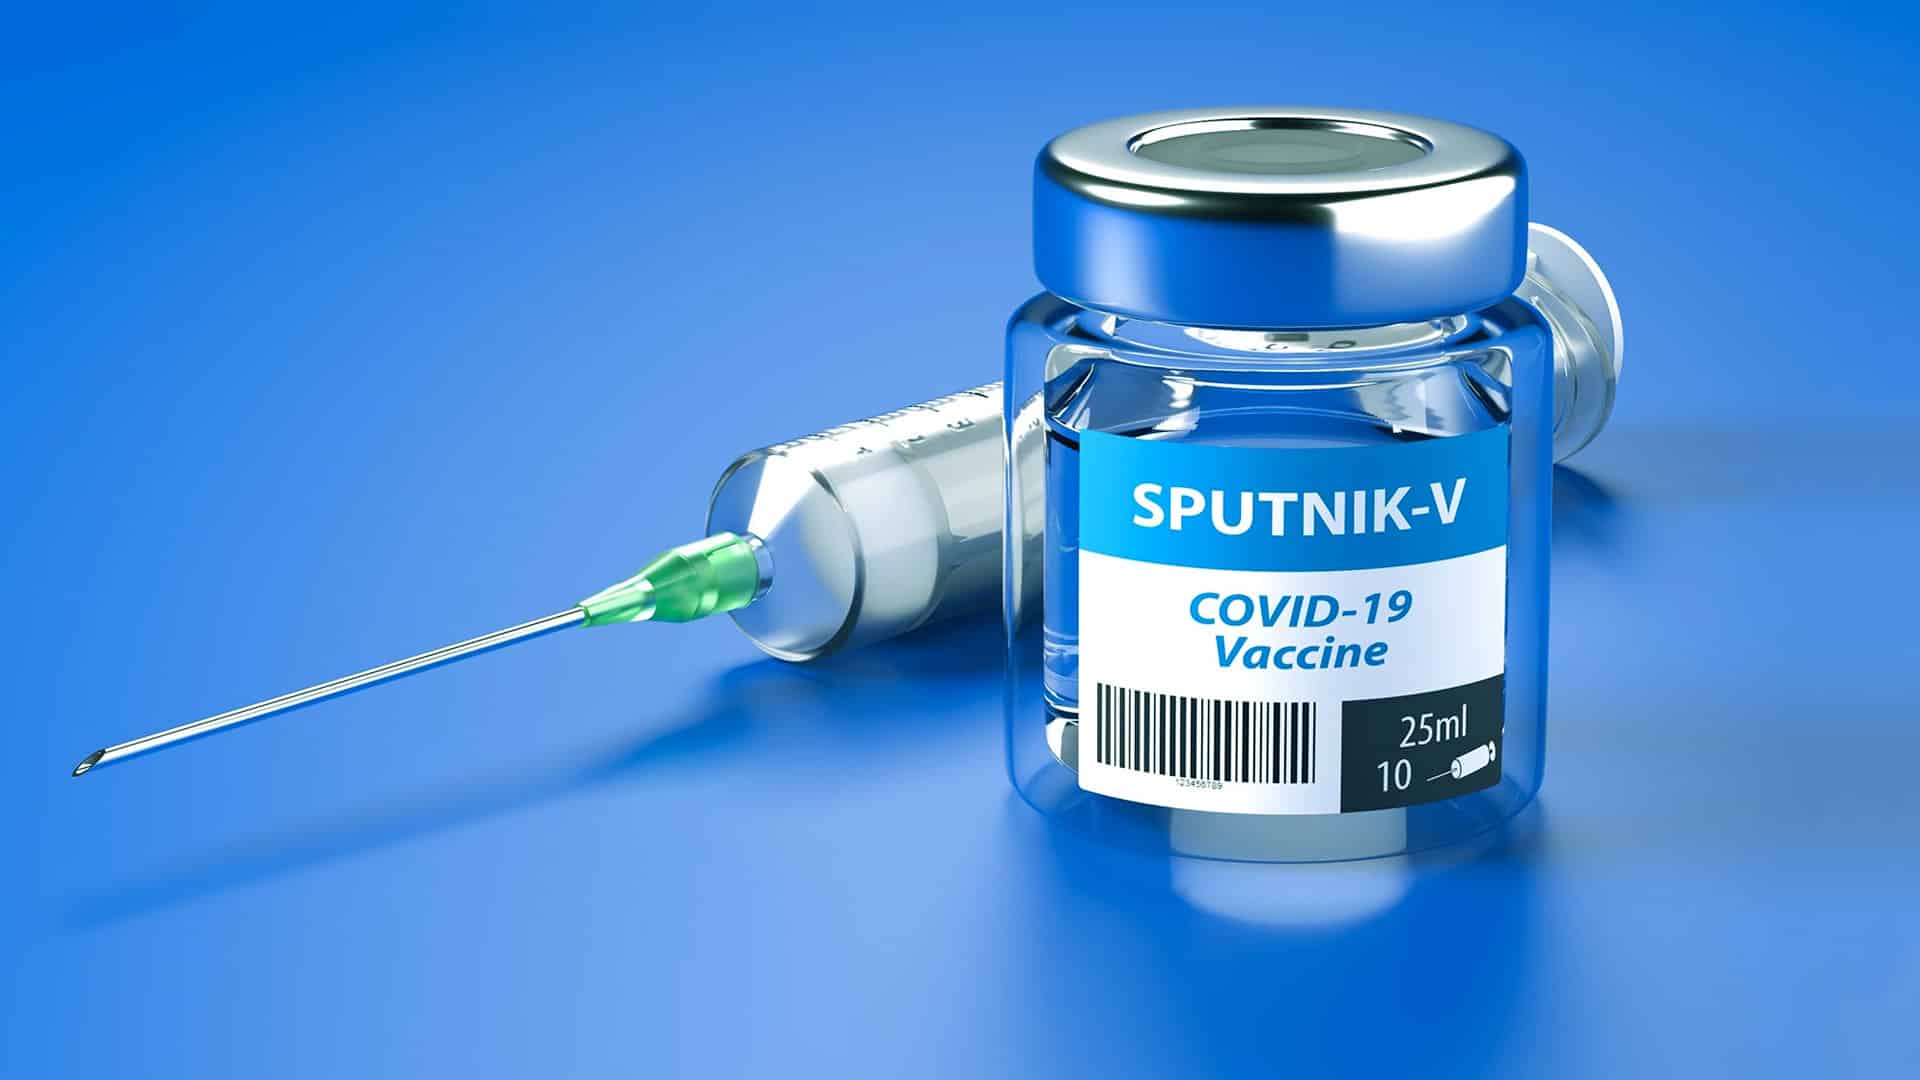 Wockhardt partners with RDIF to produce, supply Sputnik vaccine